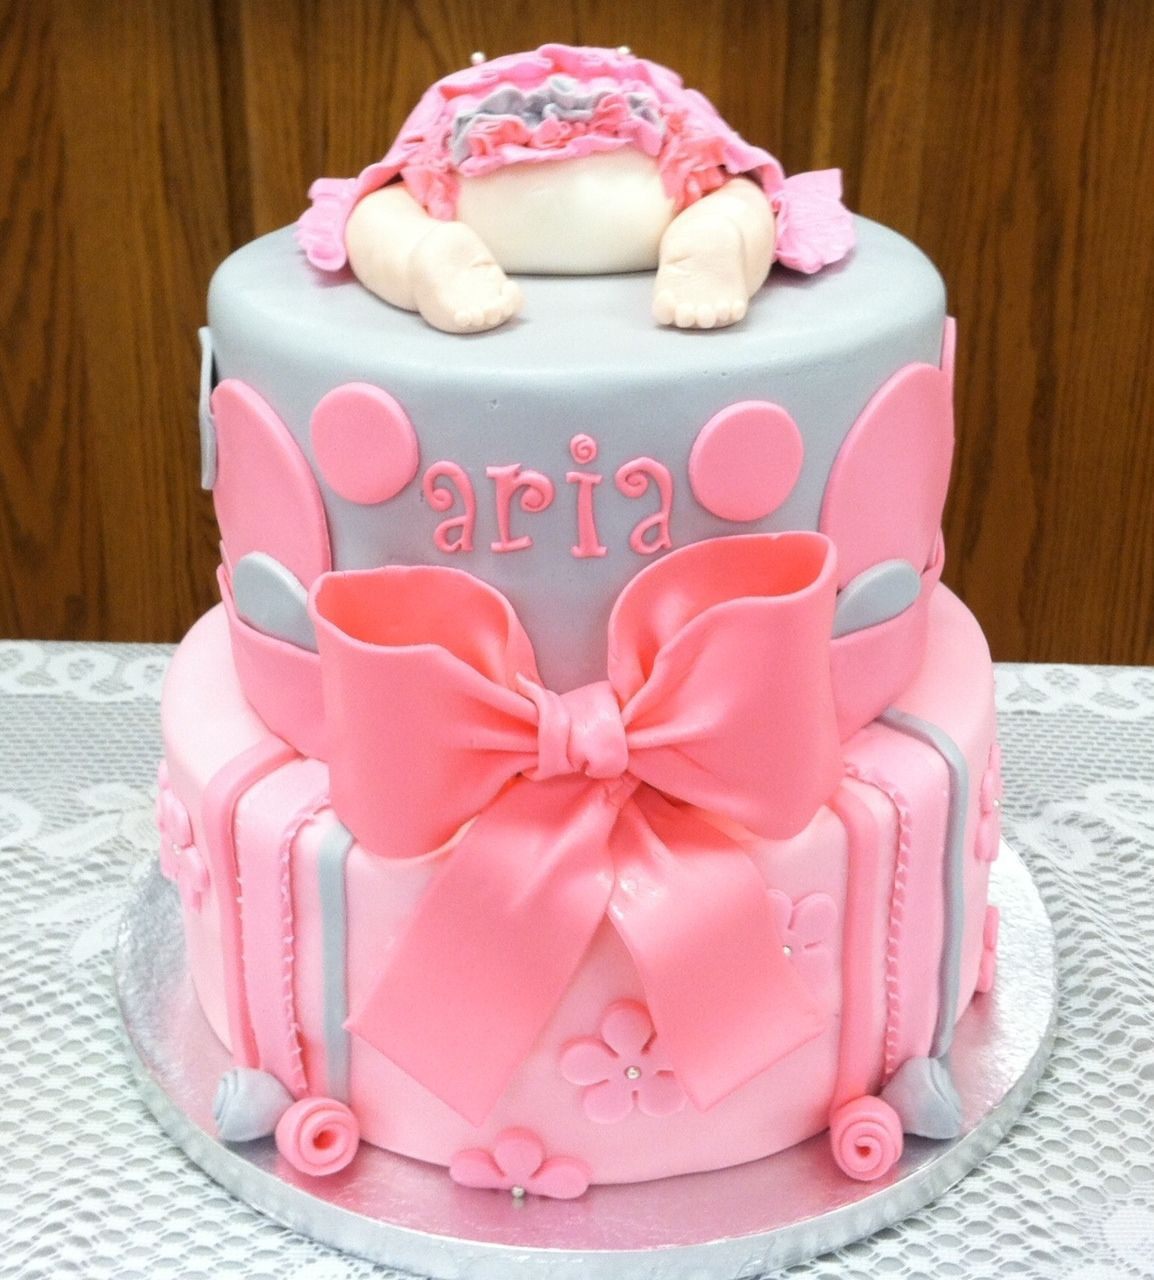 Easy Cake Decorating Ideas For Baby Shower
 Ruffled rump Baby shower cake covered in fondant She is